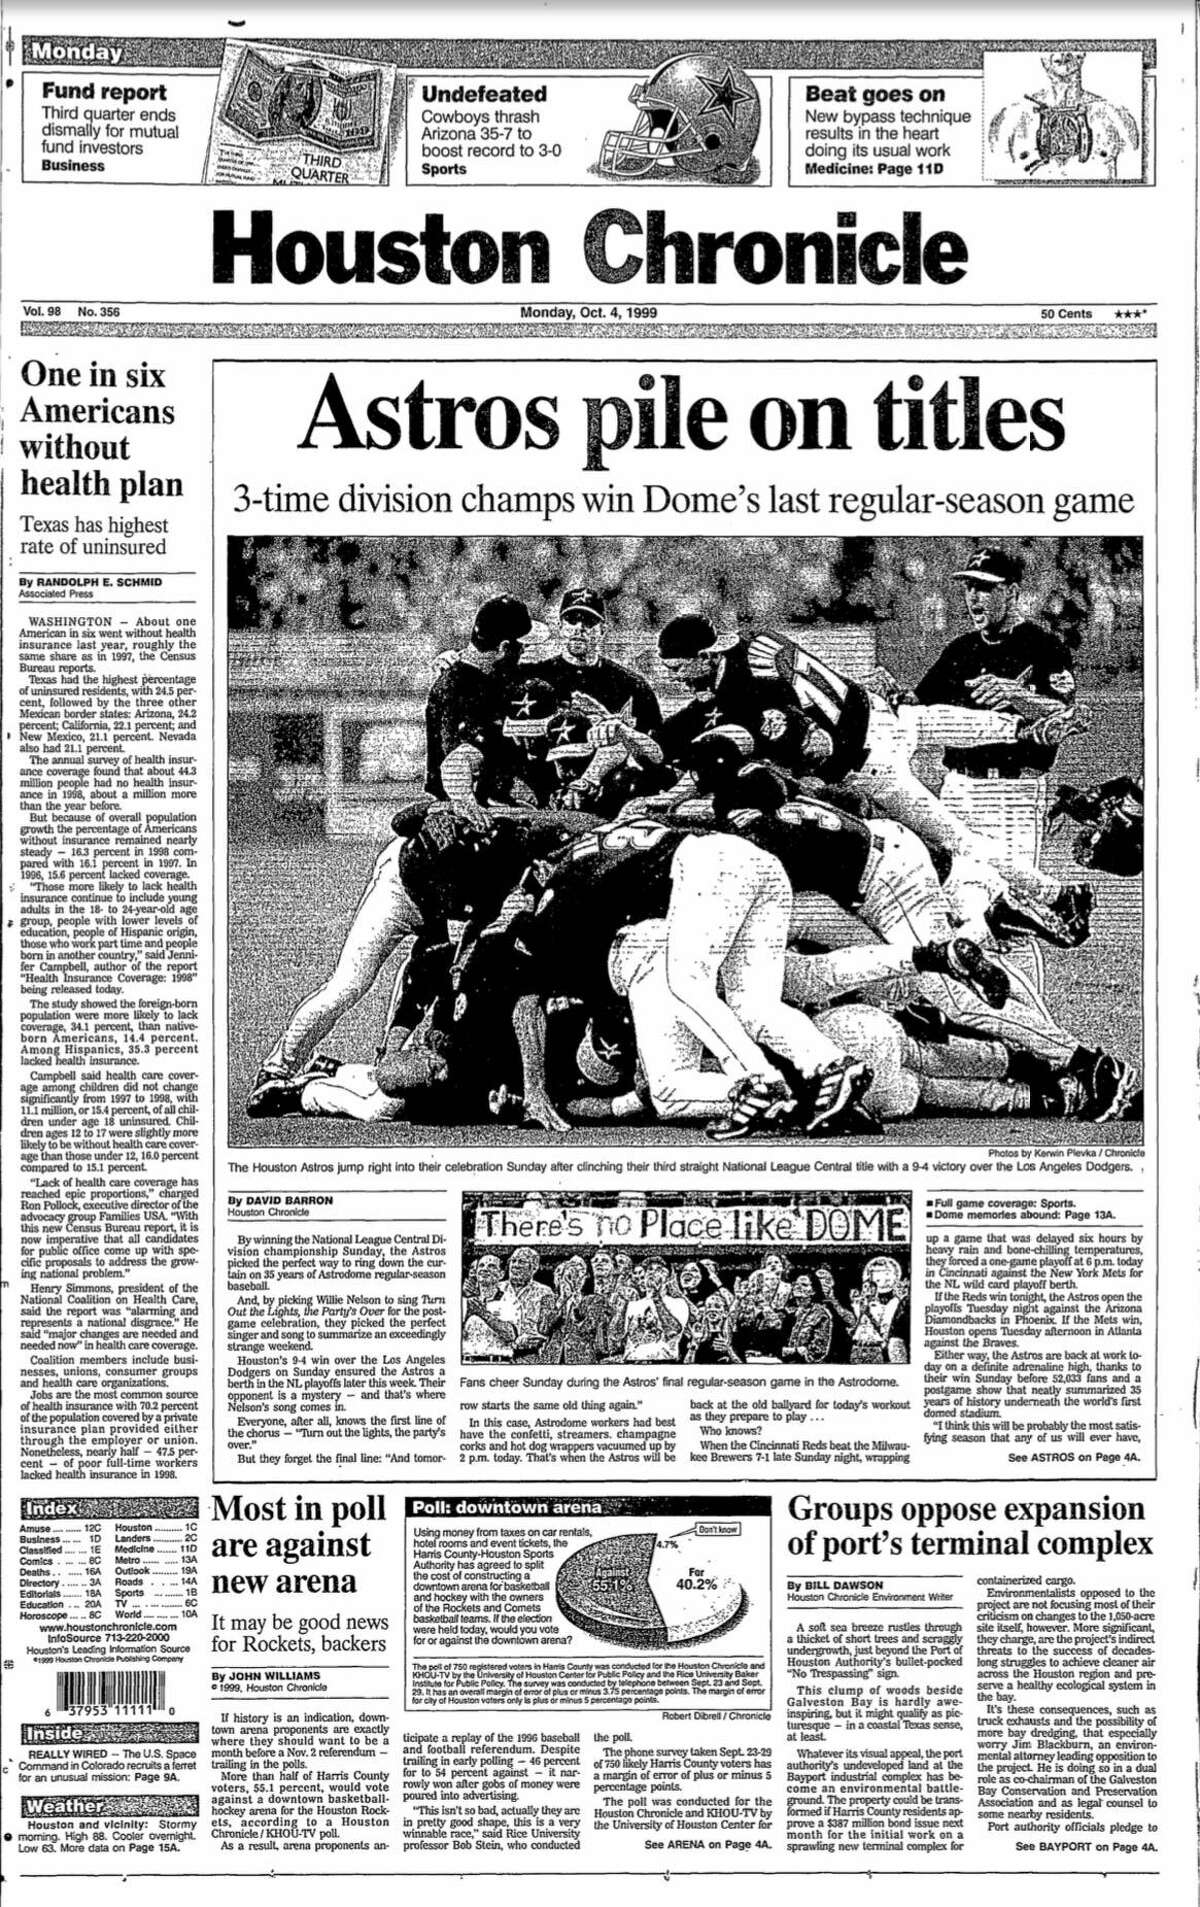 Houston Astros: Looking back at team's division title clinchers